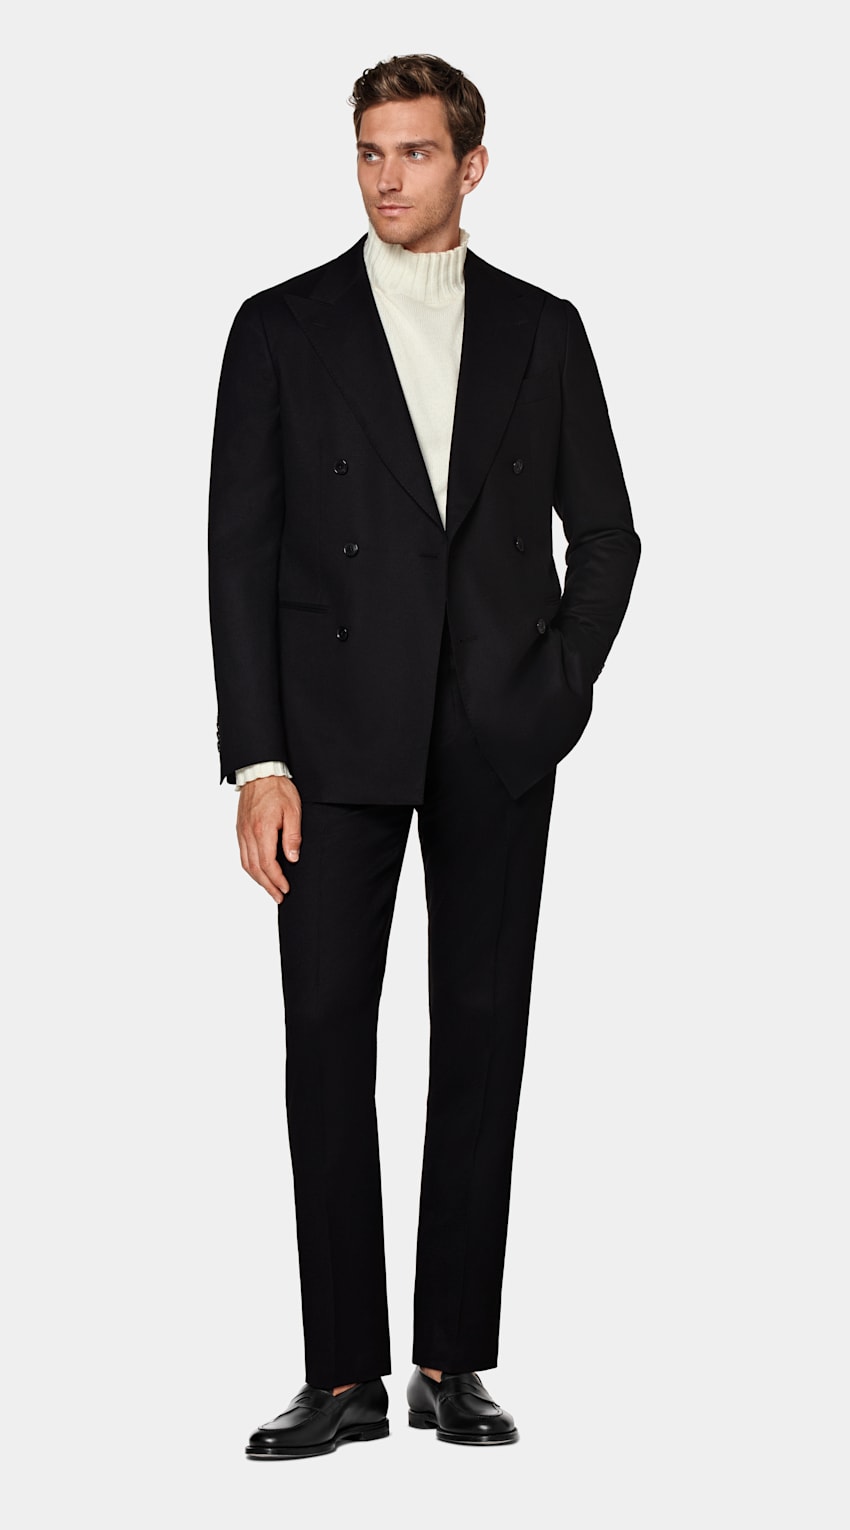 SUITSUPPLY Pure S120's Flannel Wool by Vitale Barberis Canonico, Italy Black Havana Suit